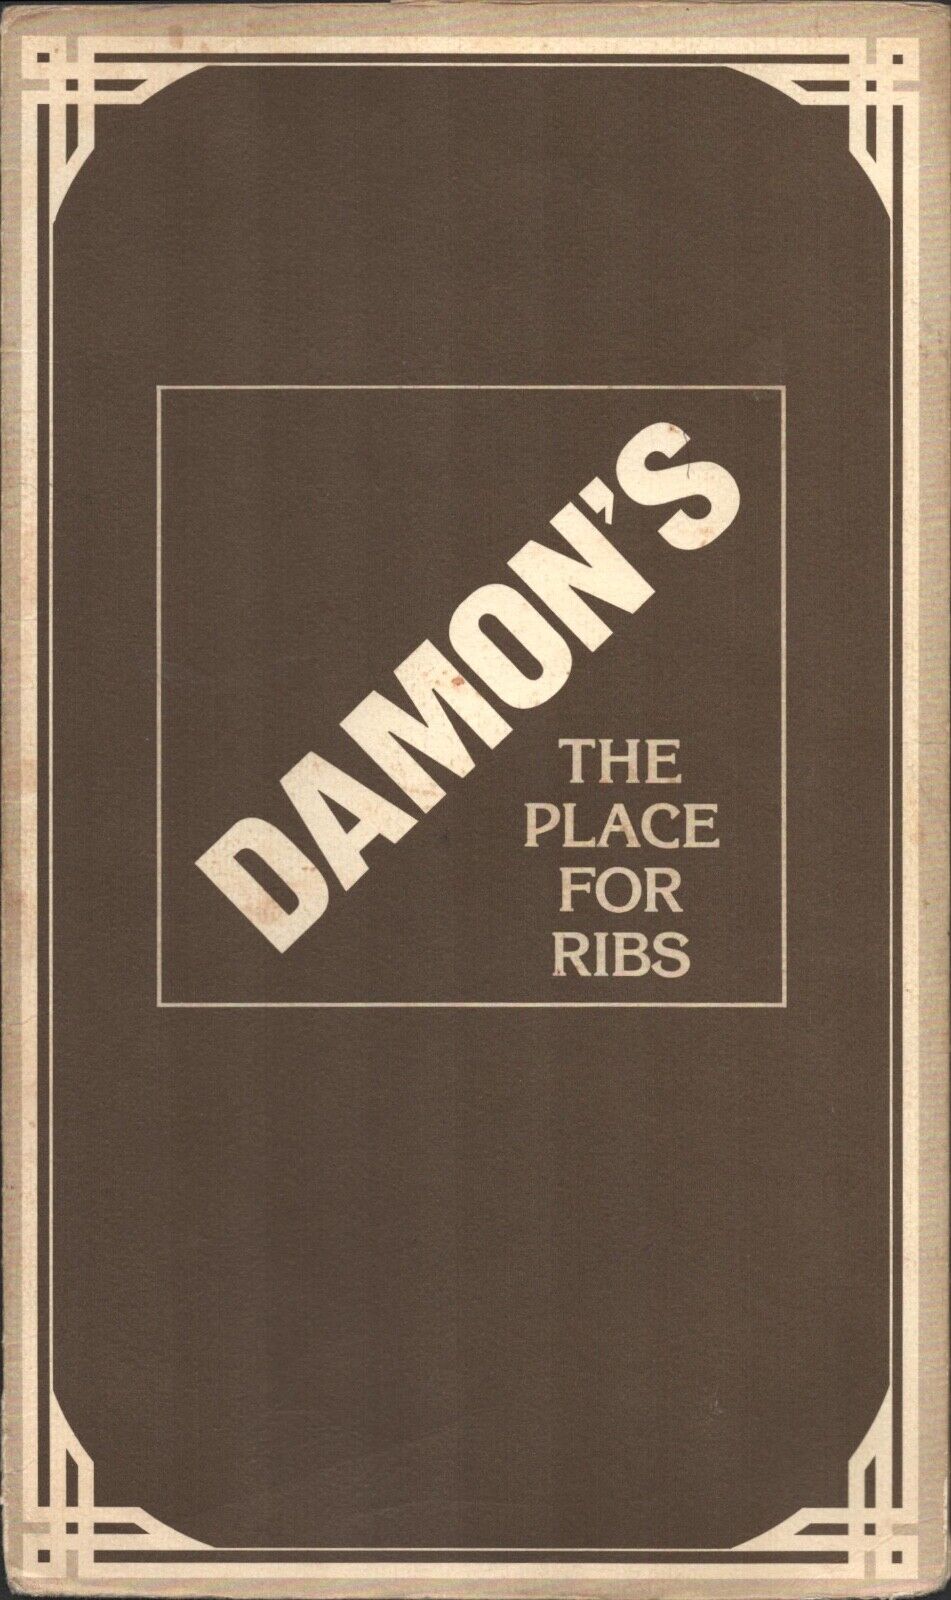 1986 DAMON'S: THE PLACE FOR RIBS vintage restaurant dining menu EAST COAST CHAIN